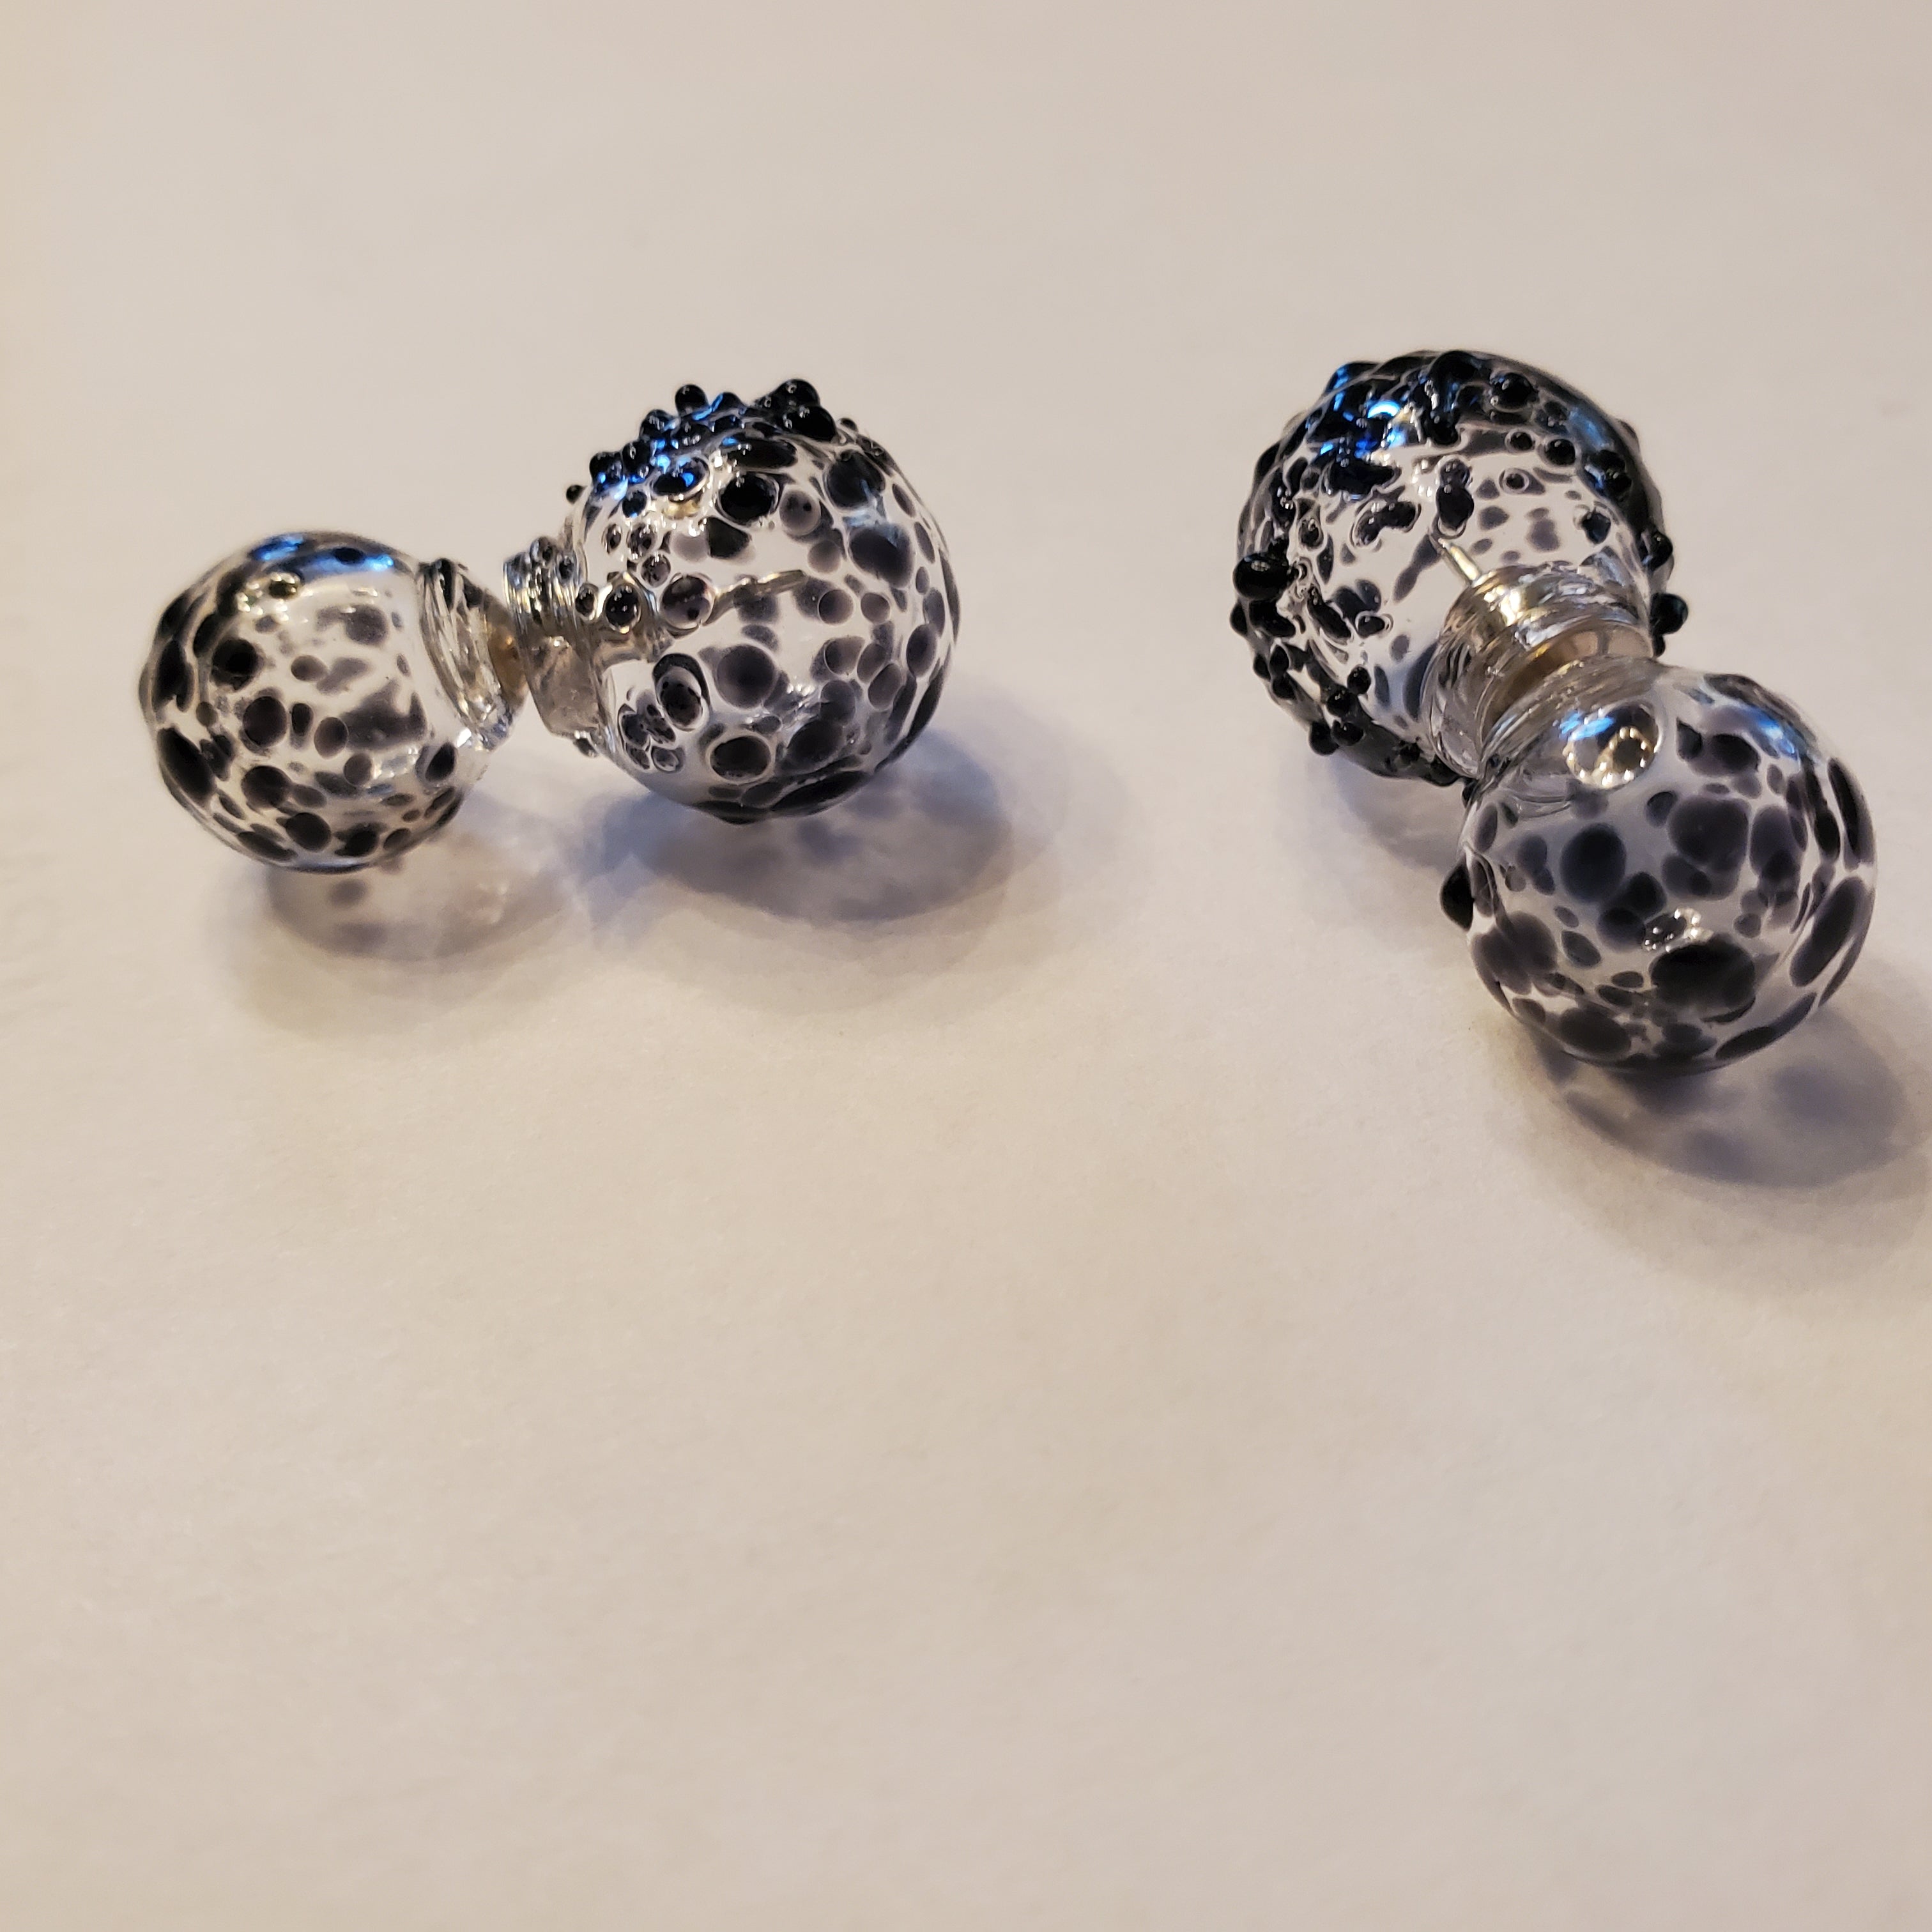 black speckled glass double sided earrings